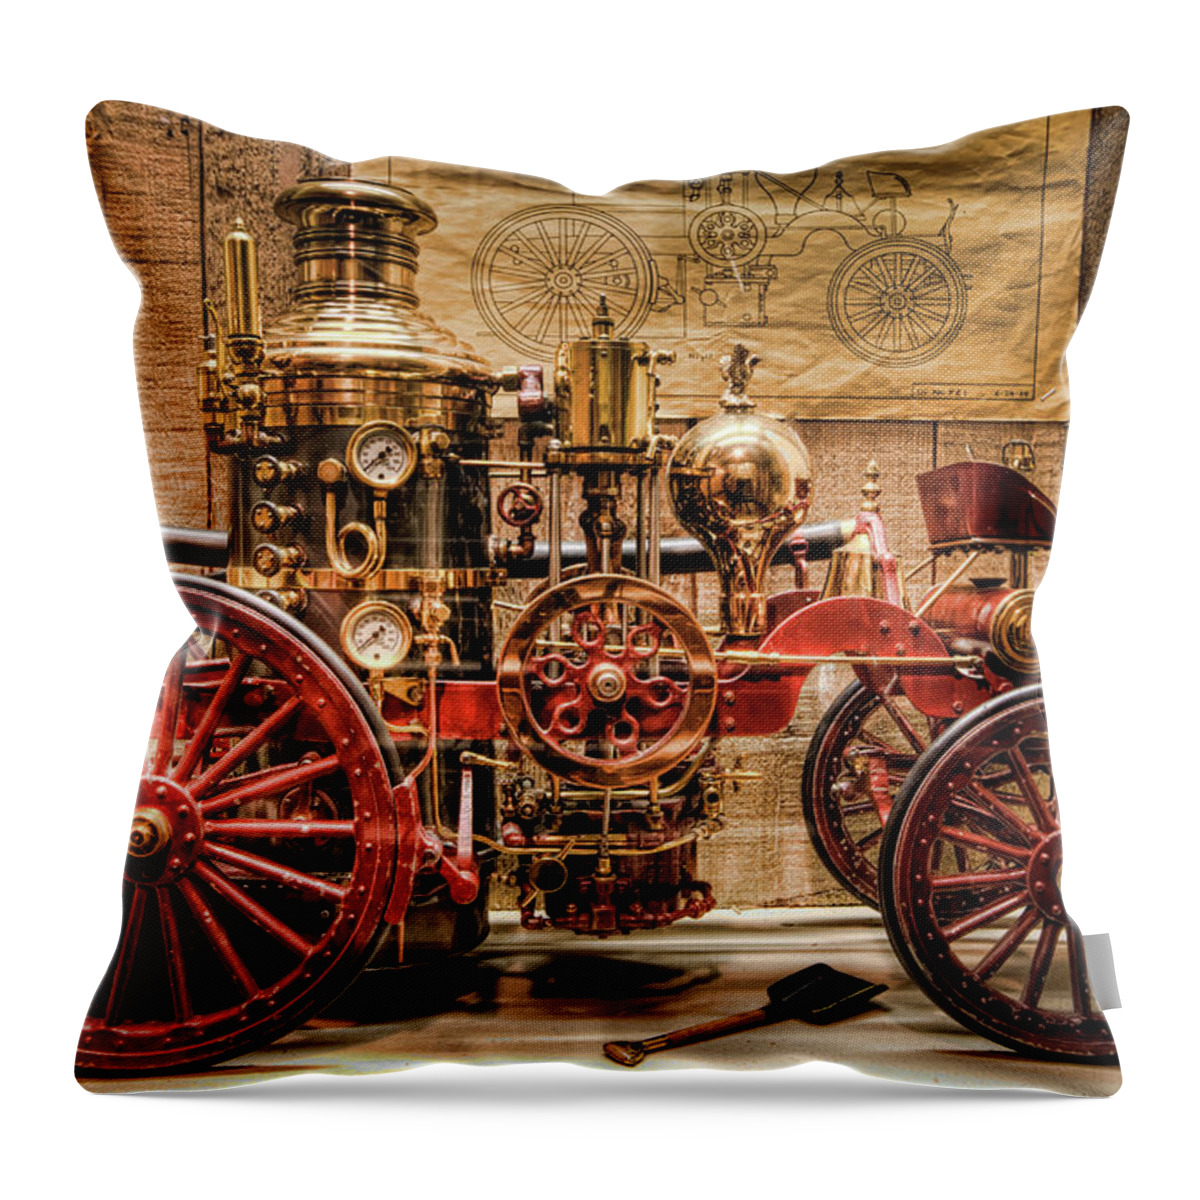 Hdr Throw Pillow featuring the photograph 1870 LaFrance by Brad Granger